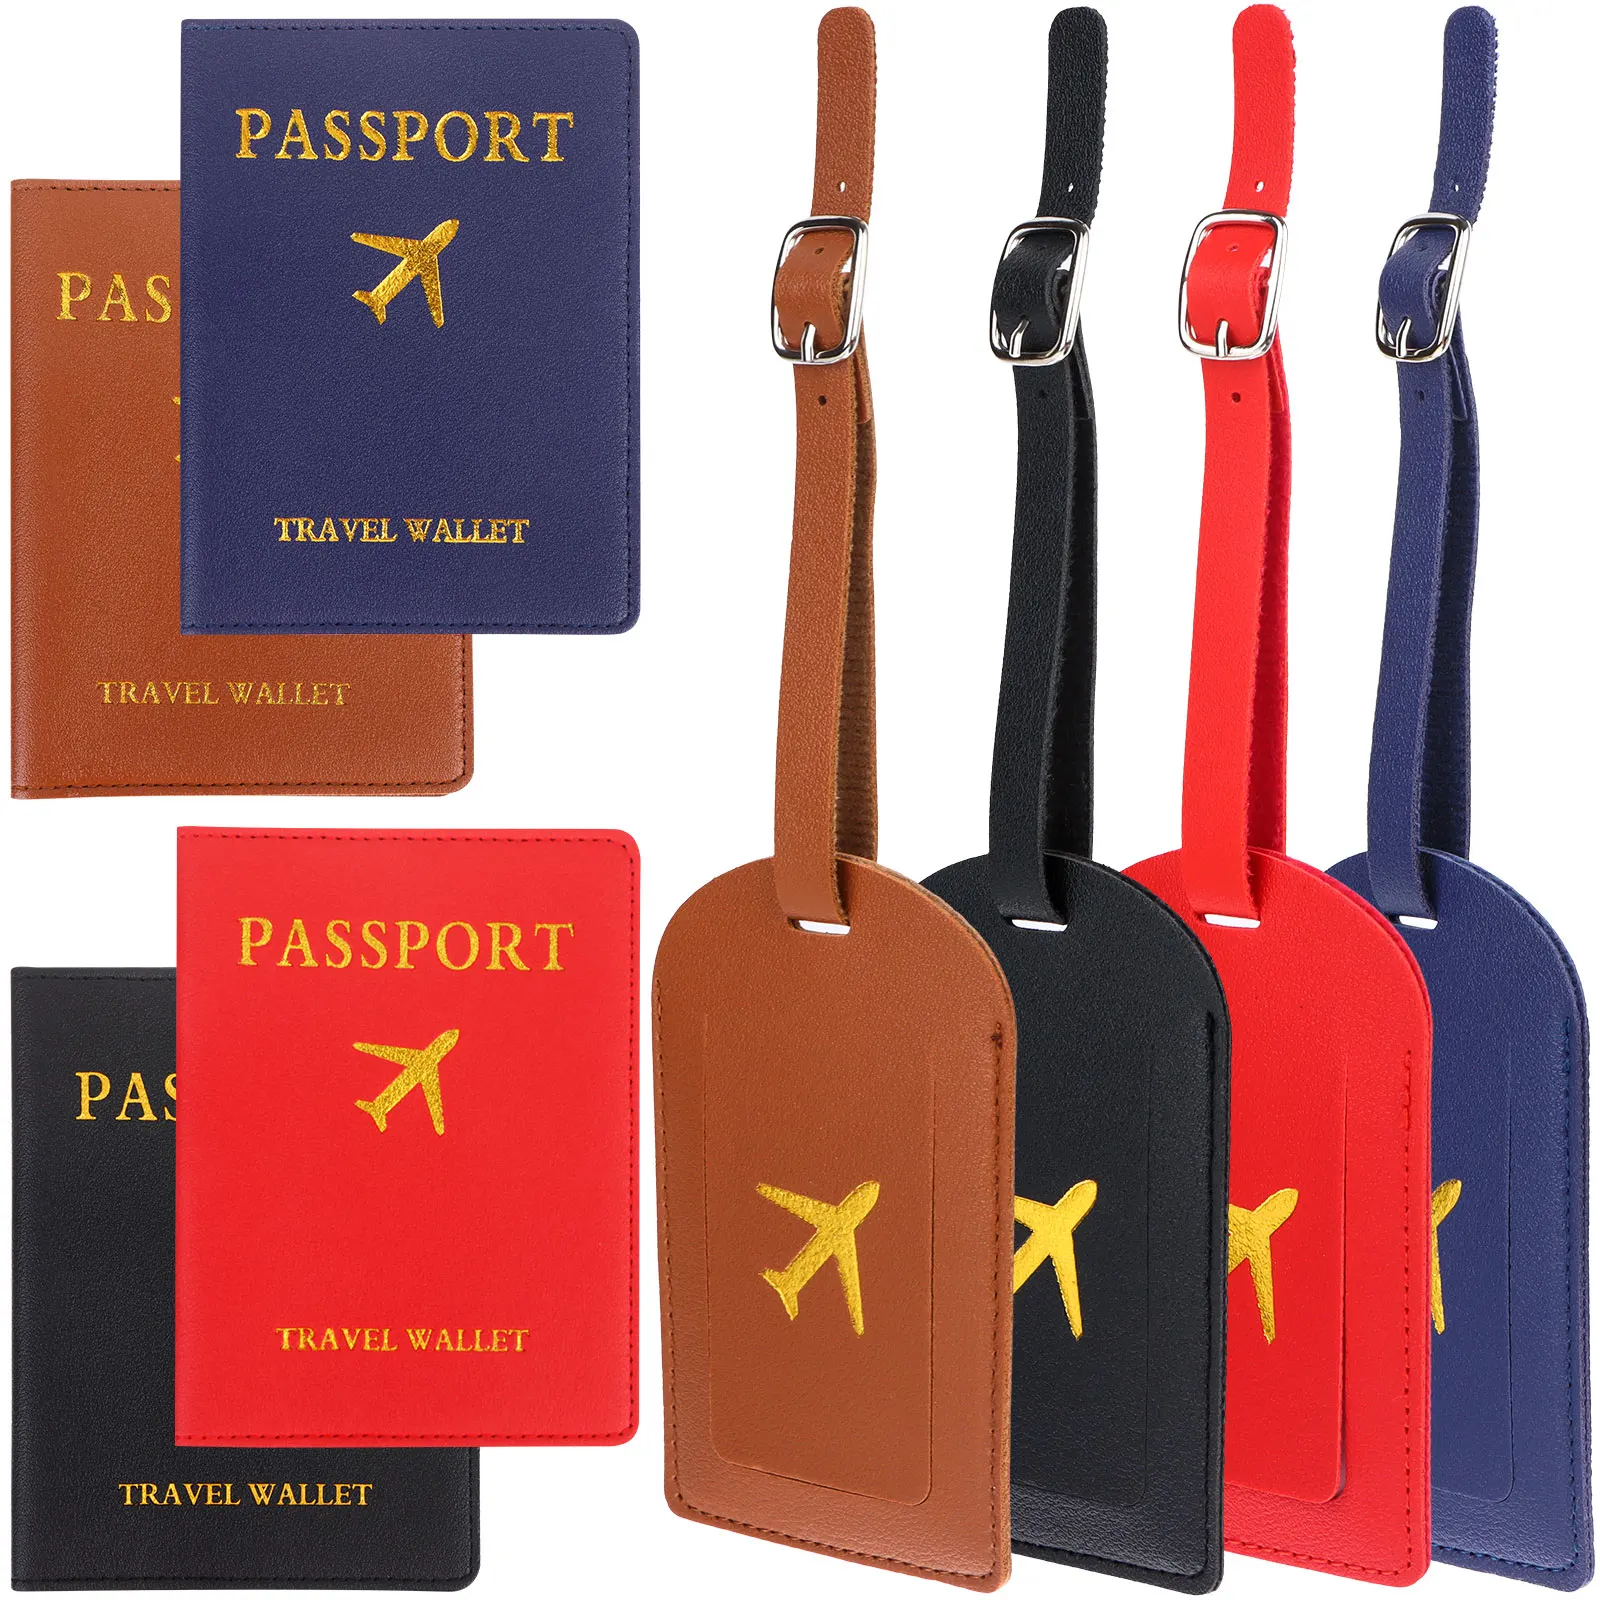 4Pcs Faux Leather Passport Cover Travel Passport Holder Luggage Tag Set